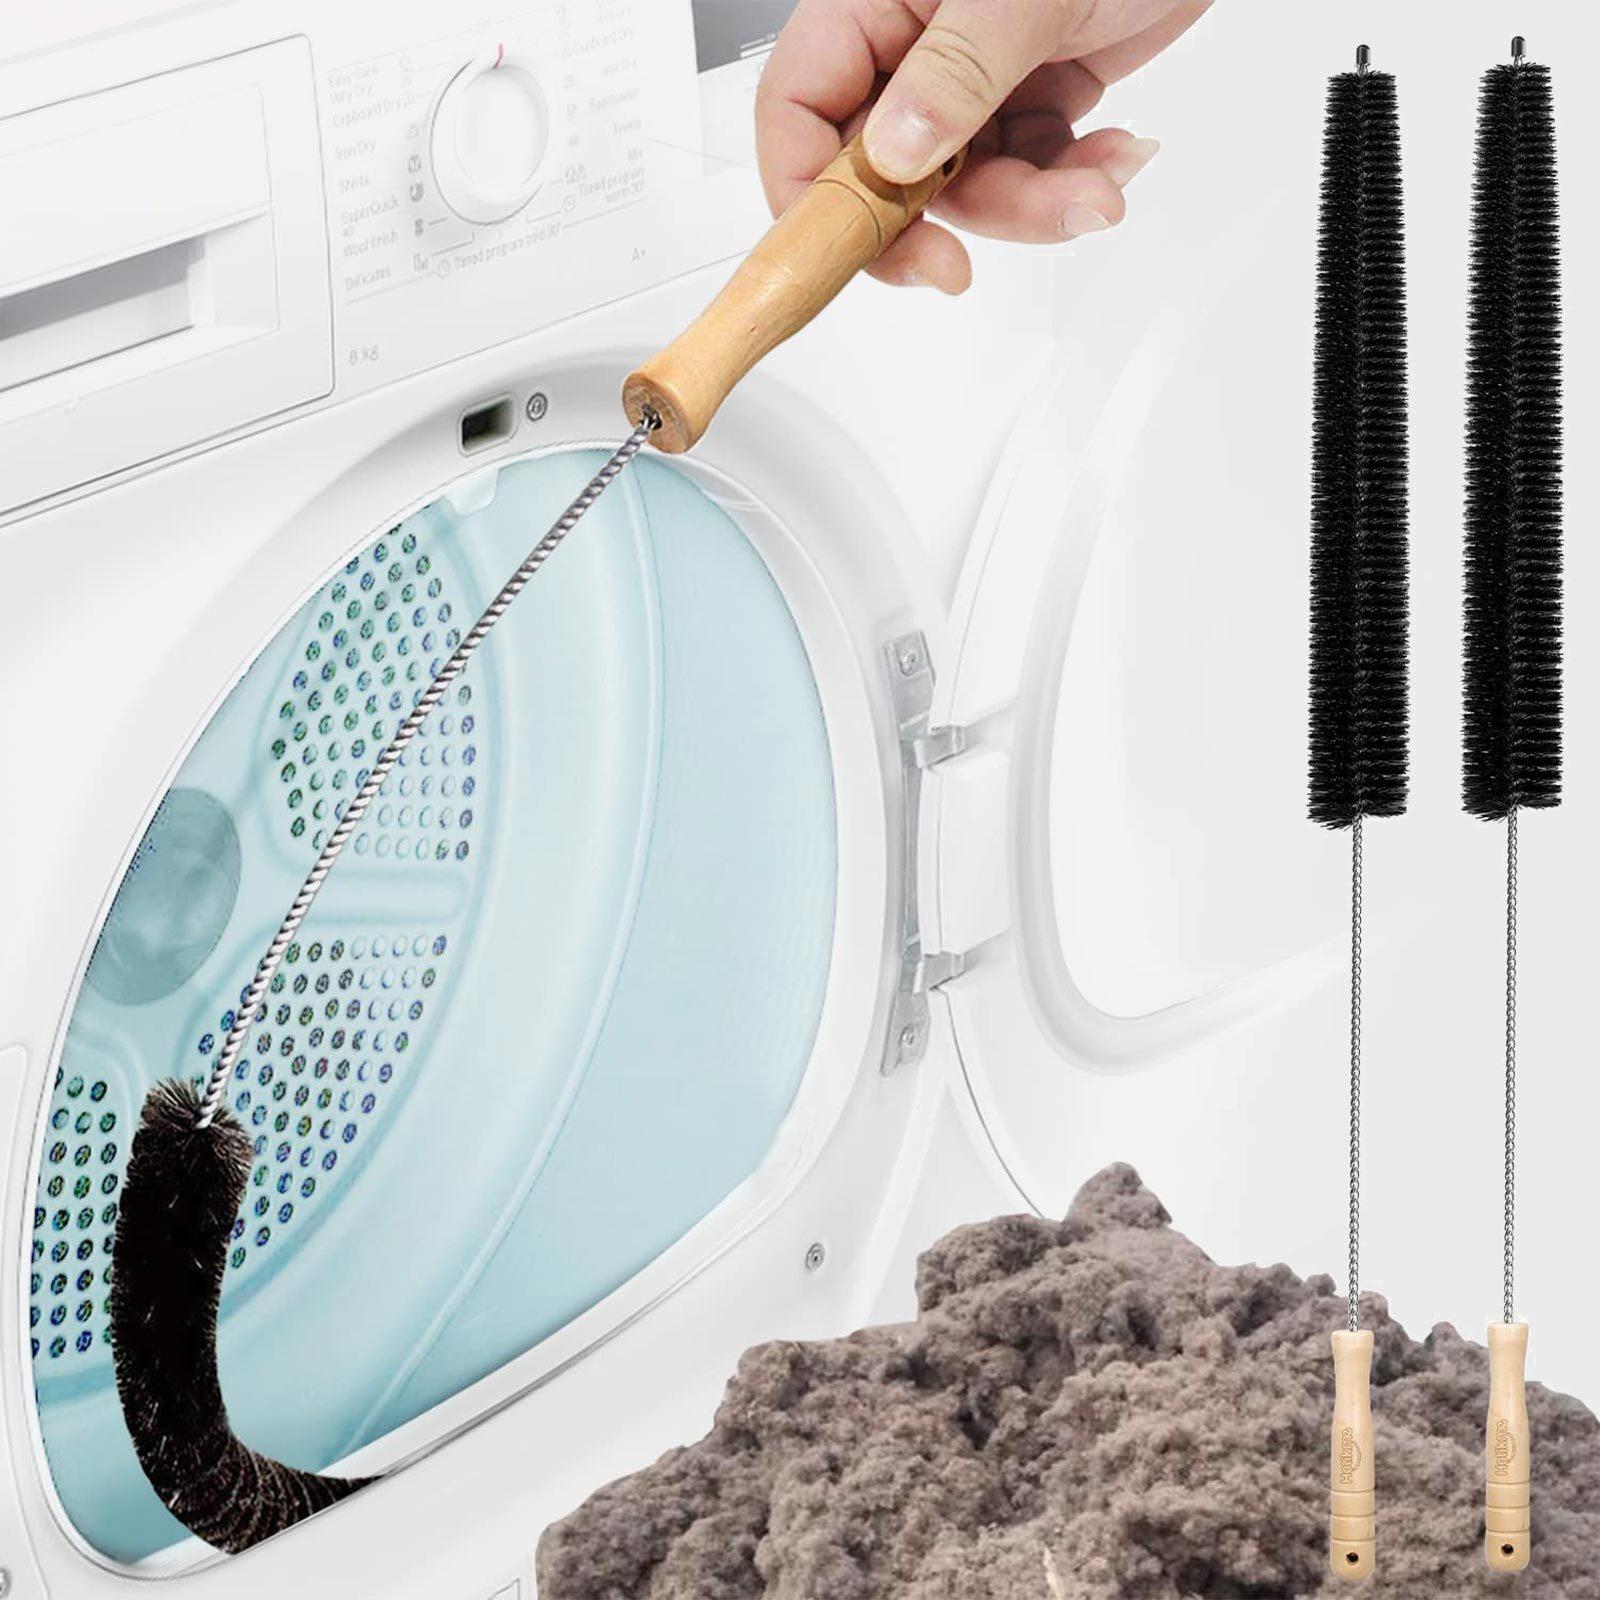 This Dryer Vent Cleaner Is a Laundry Room Essential